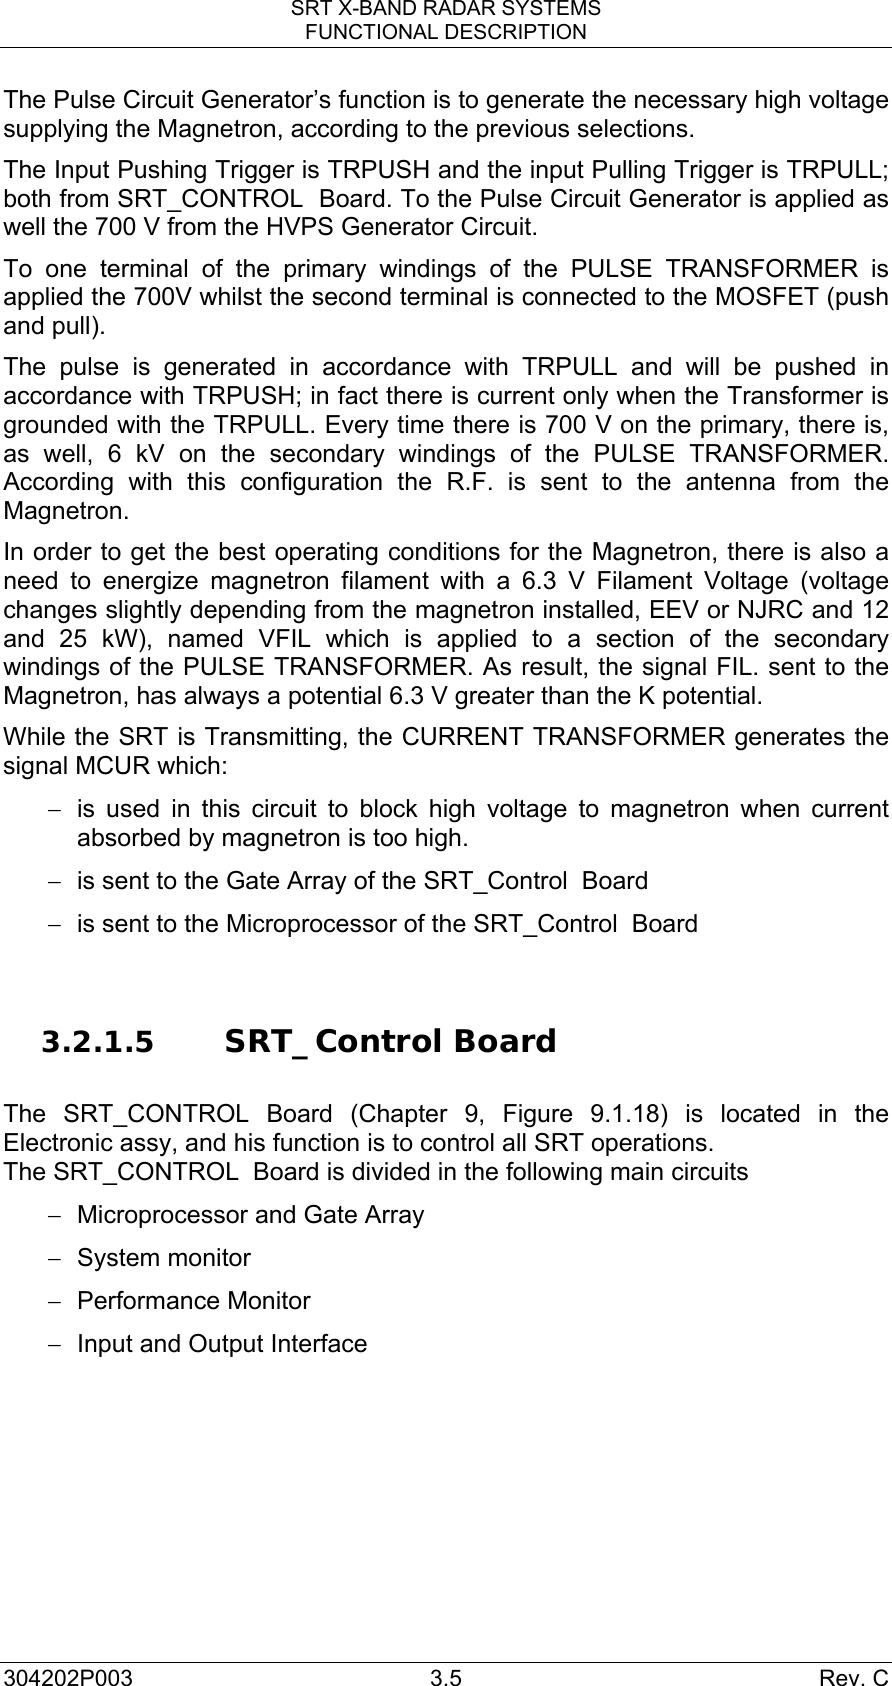 SRT X-BAND RADAR SYSTEMS FUNCTIONAL DESCRIPTION 304202P003 3.5  Rev. C The Pulse Circuit Generator’s function is to generate the necessary high voltage supplying the Magnetron, according to the previous selections. The Input Pushing Trigger is TRPUSH and the input Pulling Trigger is TRPULL; both from SRT_CONTROL  Board. To the Pulse Circuit Generator is applied as well the 700 V from the HVPS Generator Circuit. To one terminal of the primary windings of the PULSE TRANSFORMER is applied the 700V whilst the second terminal is connected to the MOSFET (push and pull). The pulse is generated in accordance with TRPULL and will be pushed in accordance with TRPUSH; in fact there is current only when the Transformer is grounded with the TRPULL. Every time there is 700 V on the primary, there is, as well, 6 kV on the secondary windings of the PULSE TRANSFORMER. According with this configuration the R.F. is sent to the antenna from the Magnetron. In order to get the best operating conditions for the Magnetron, there is also a need to energize magnetron filament with a 6.3 V Filament Voltage (voltage changes slightly depending from the magnetron installed, EEV or NJRC and 12 and 25 kW), named VFIL which is applied to a section of the secondary windings of the PULSE TRANSFORMER. As result, the signal FIL. sent to the Magnetron, has always a potential 6.3 V greater than the K potential. While the SRT is Transmitting, the CURRENT TRANSFORMER generates the signal MCUR which: −  is used in this circuit to block high voltage to magnetron when current absorbed by magnetron is too high. −  is sent to the Gate Array of the SRT_Control  Board −  is sent to the Microprocessor of the SRT_Control  Board   3.2.1.5 SRT_Control Board   The SRT_CONTROL Board (Chapter 9, Figure 9.1.18) is located in the Electronic assy, and his function is to control all SRT operations. The SRT_CONTROL  Board is divided in the following main circuits −  Microprocessor and Gate Array − System monitor −  Performance Monitor  −  Input and Output Interface 